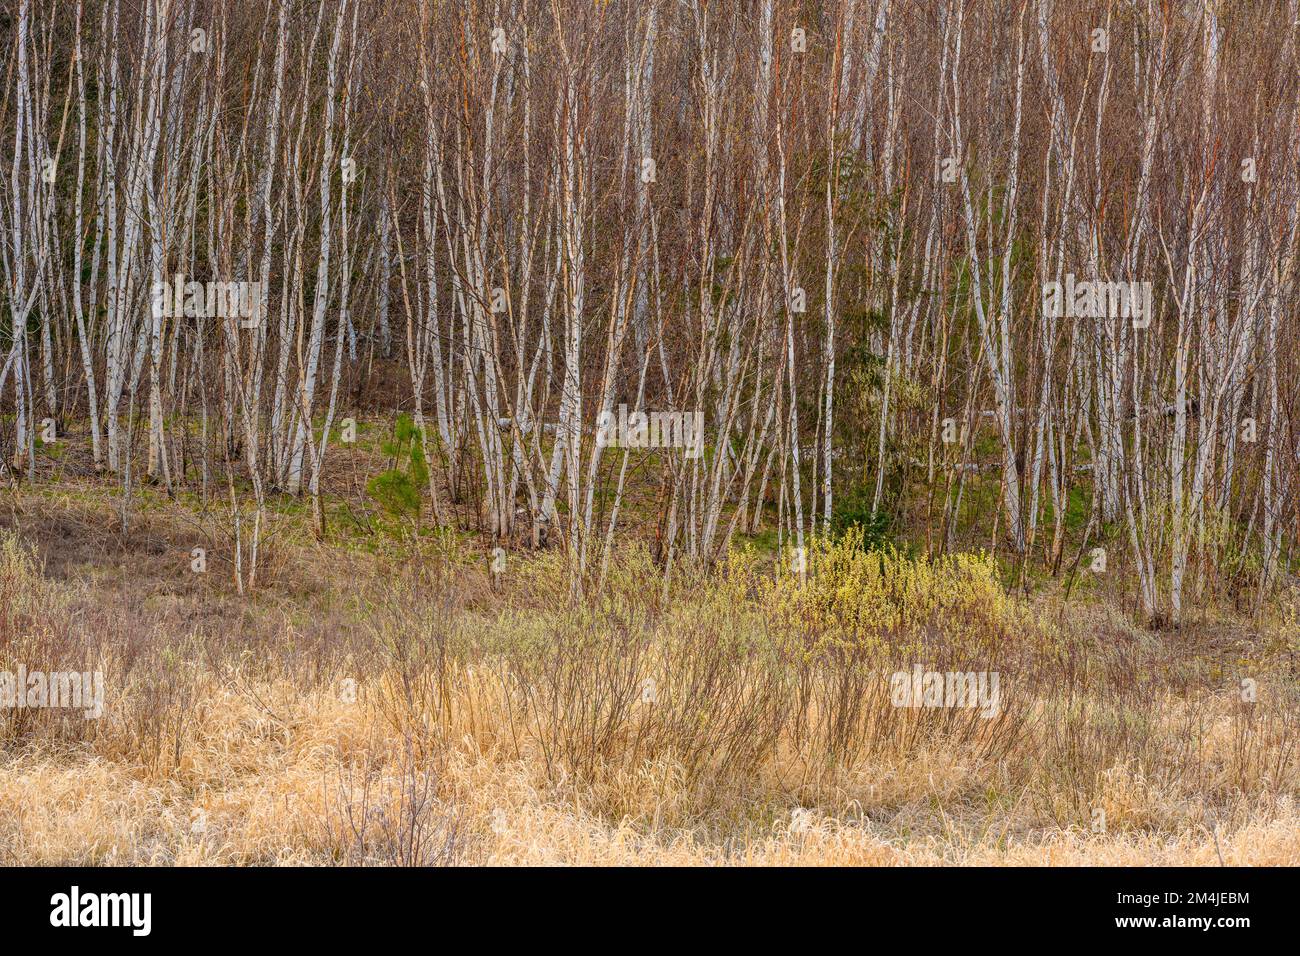 White birch tree trunks, willow in early spring, Greater Sudbury, Ontario, Canada Stock Photo